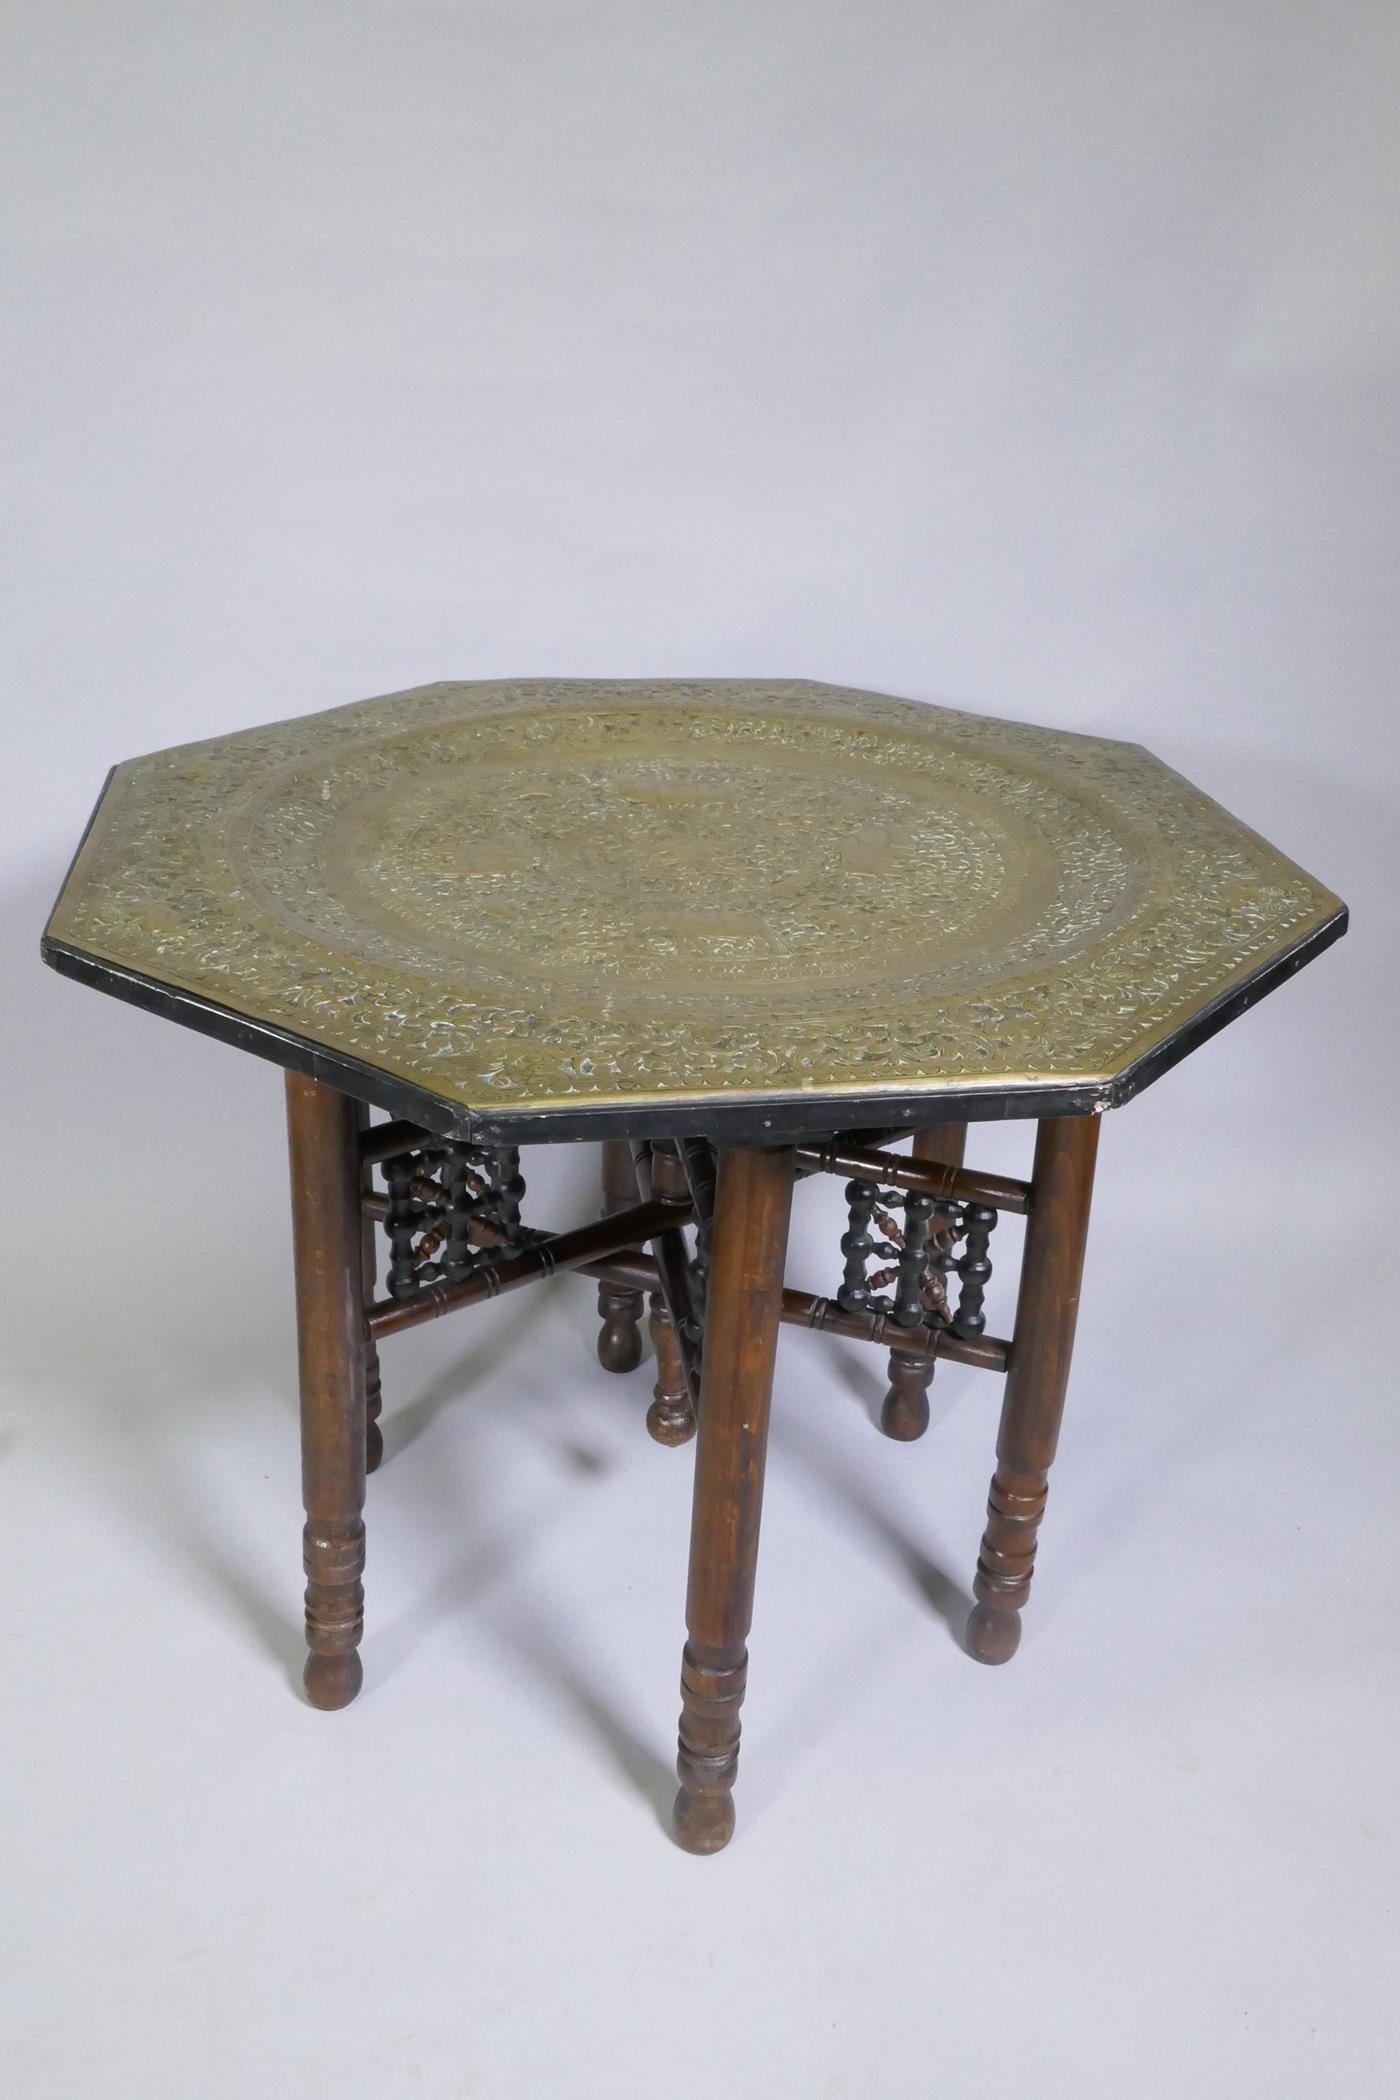 An antique Indo Persian octagonal brass tray table with repousse elephant and bird decoration, - Image 4 of 6